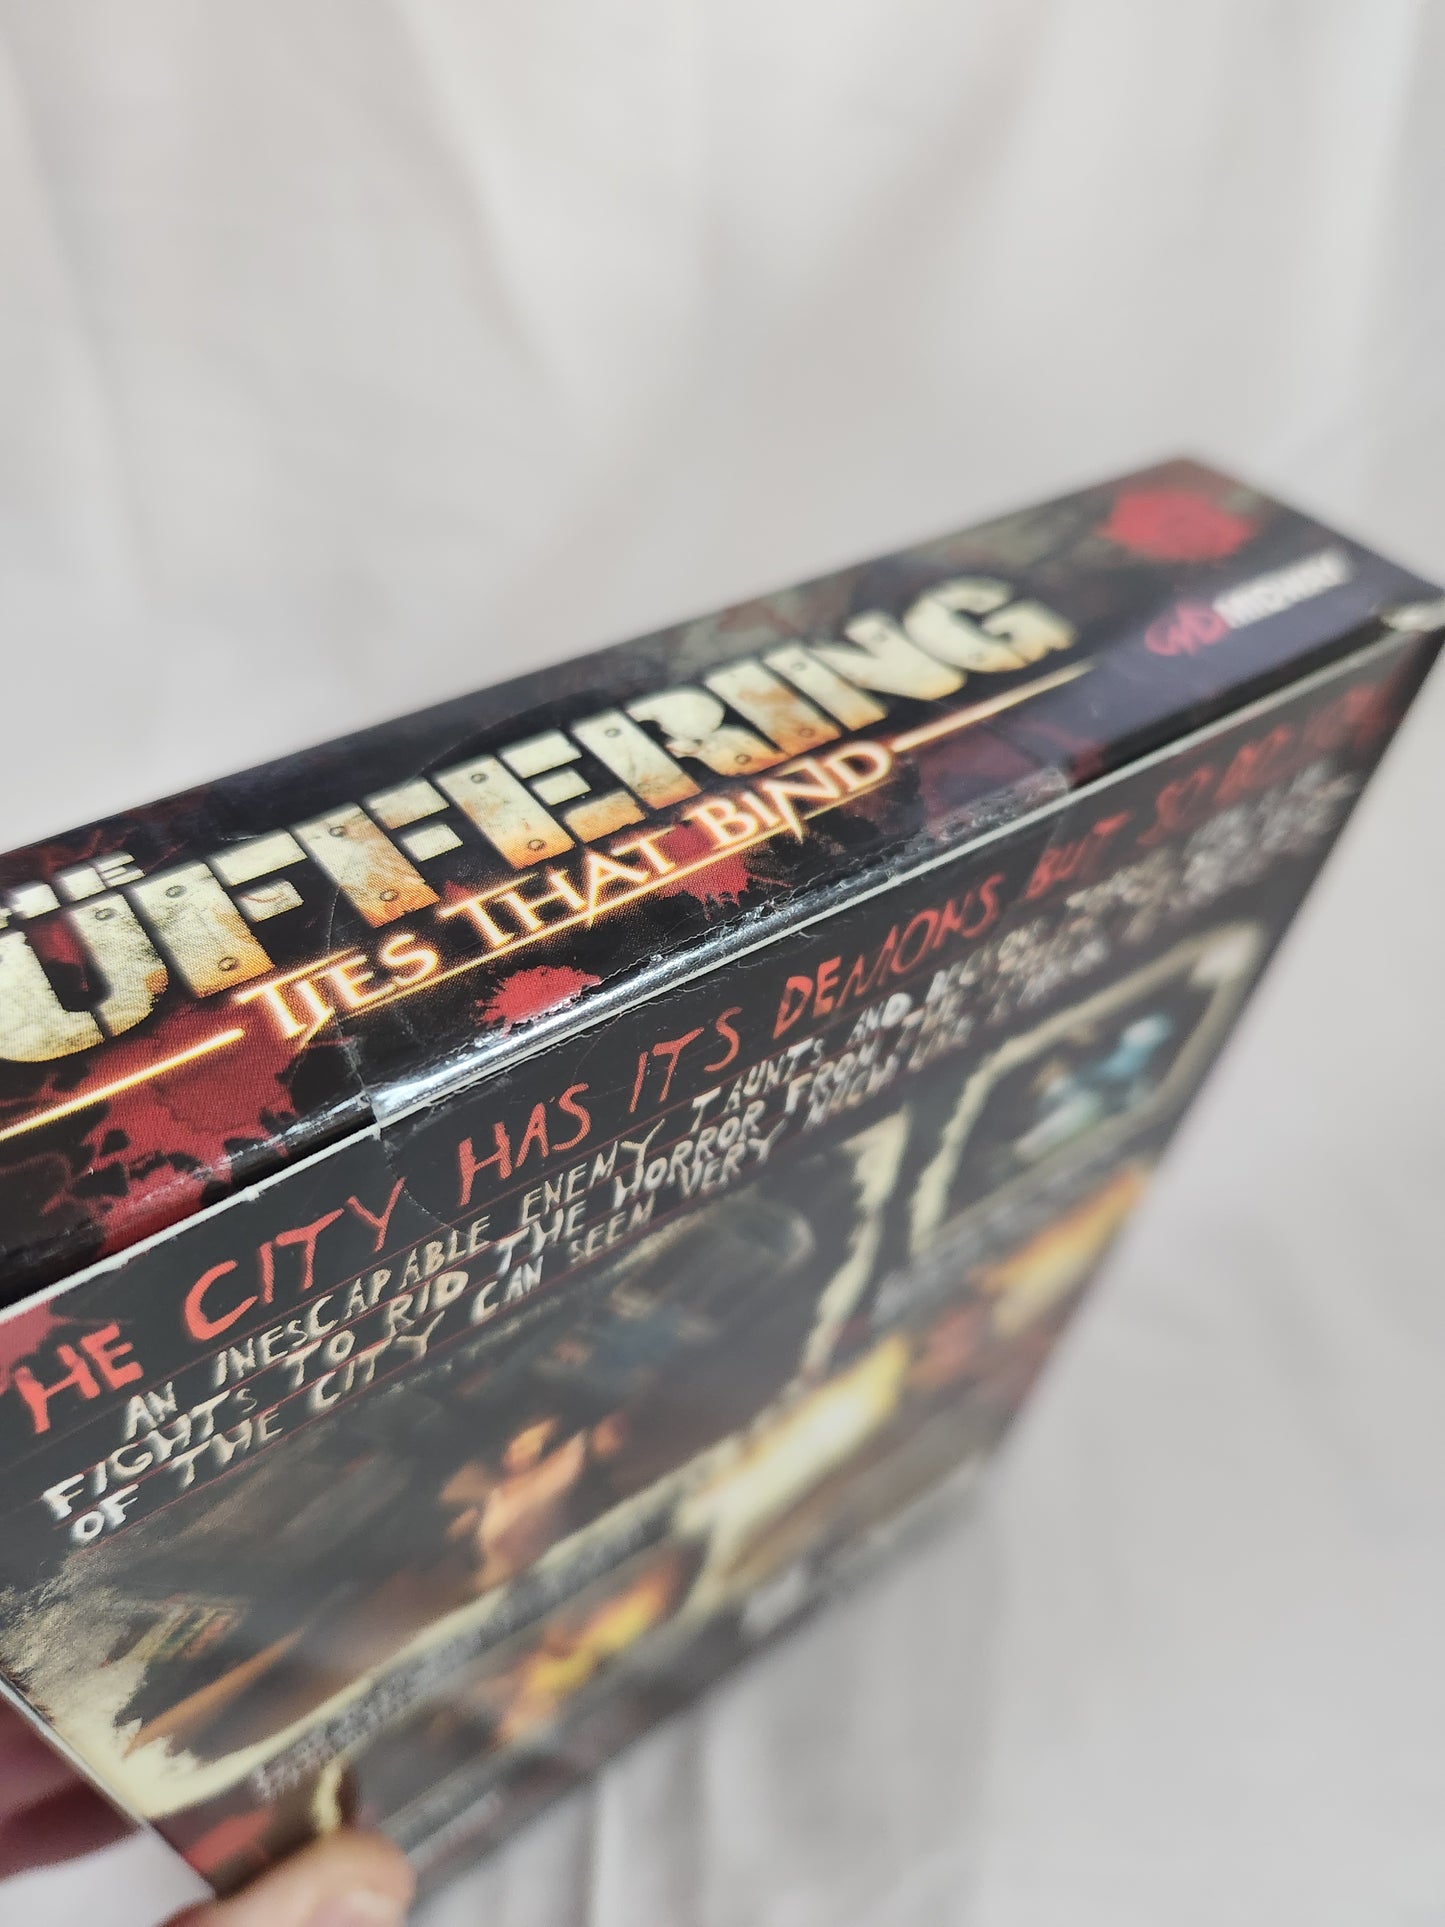 The Suffering: Ties that Bind PC CD-ROM Game